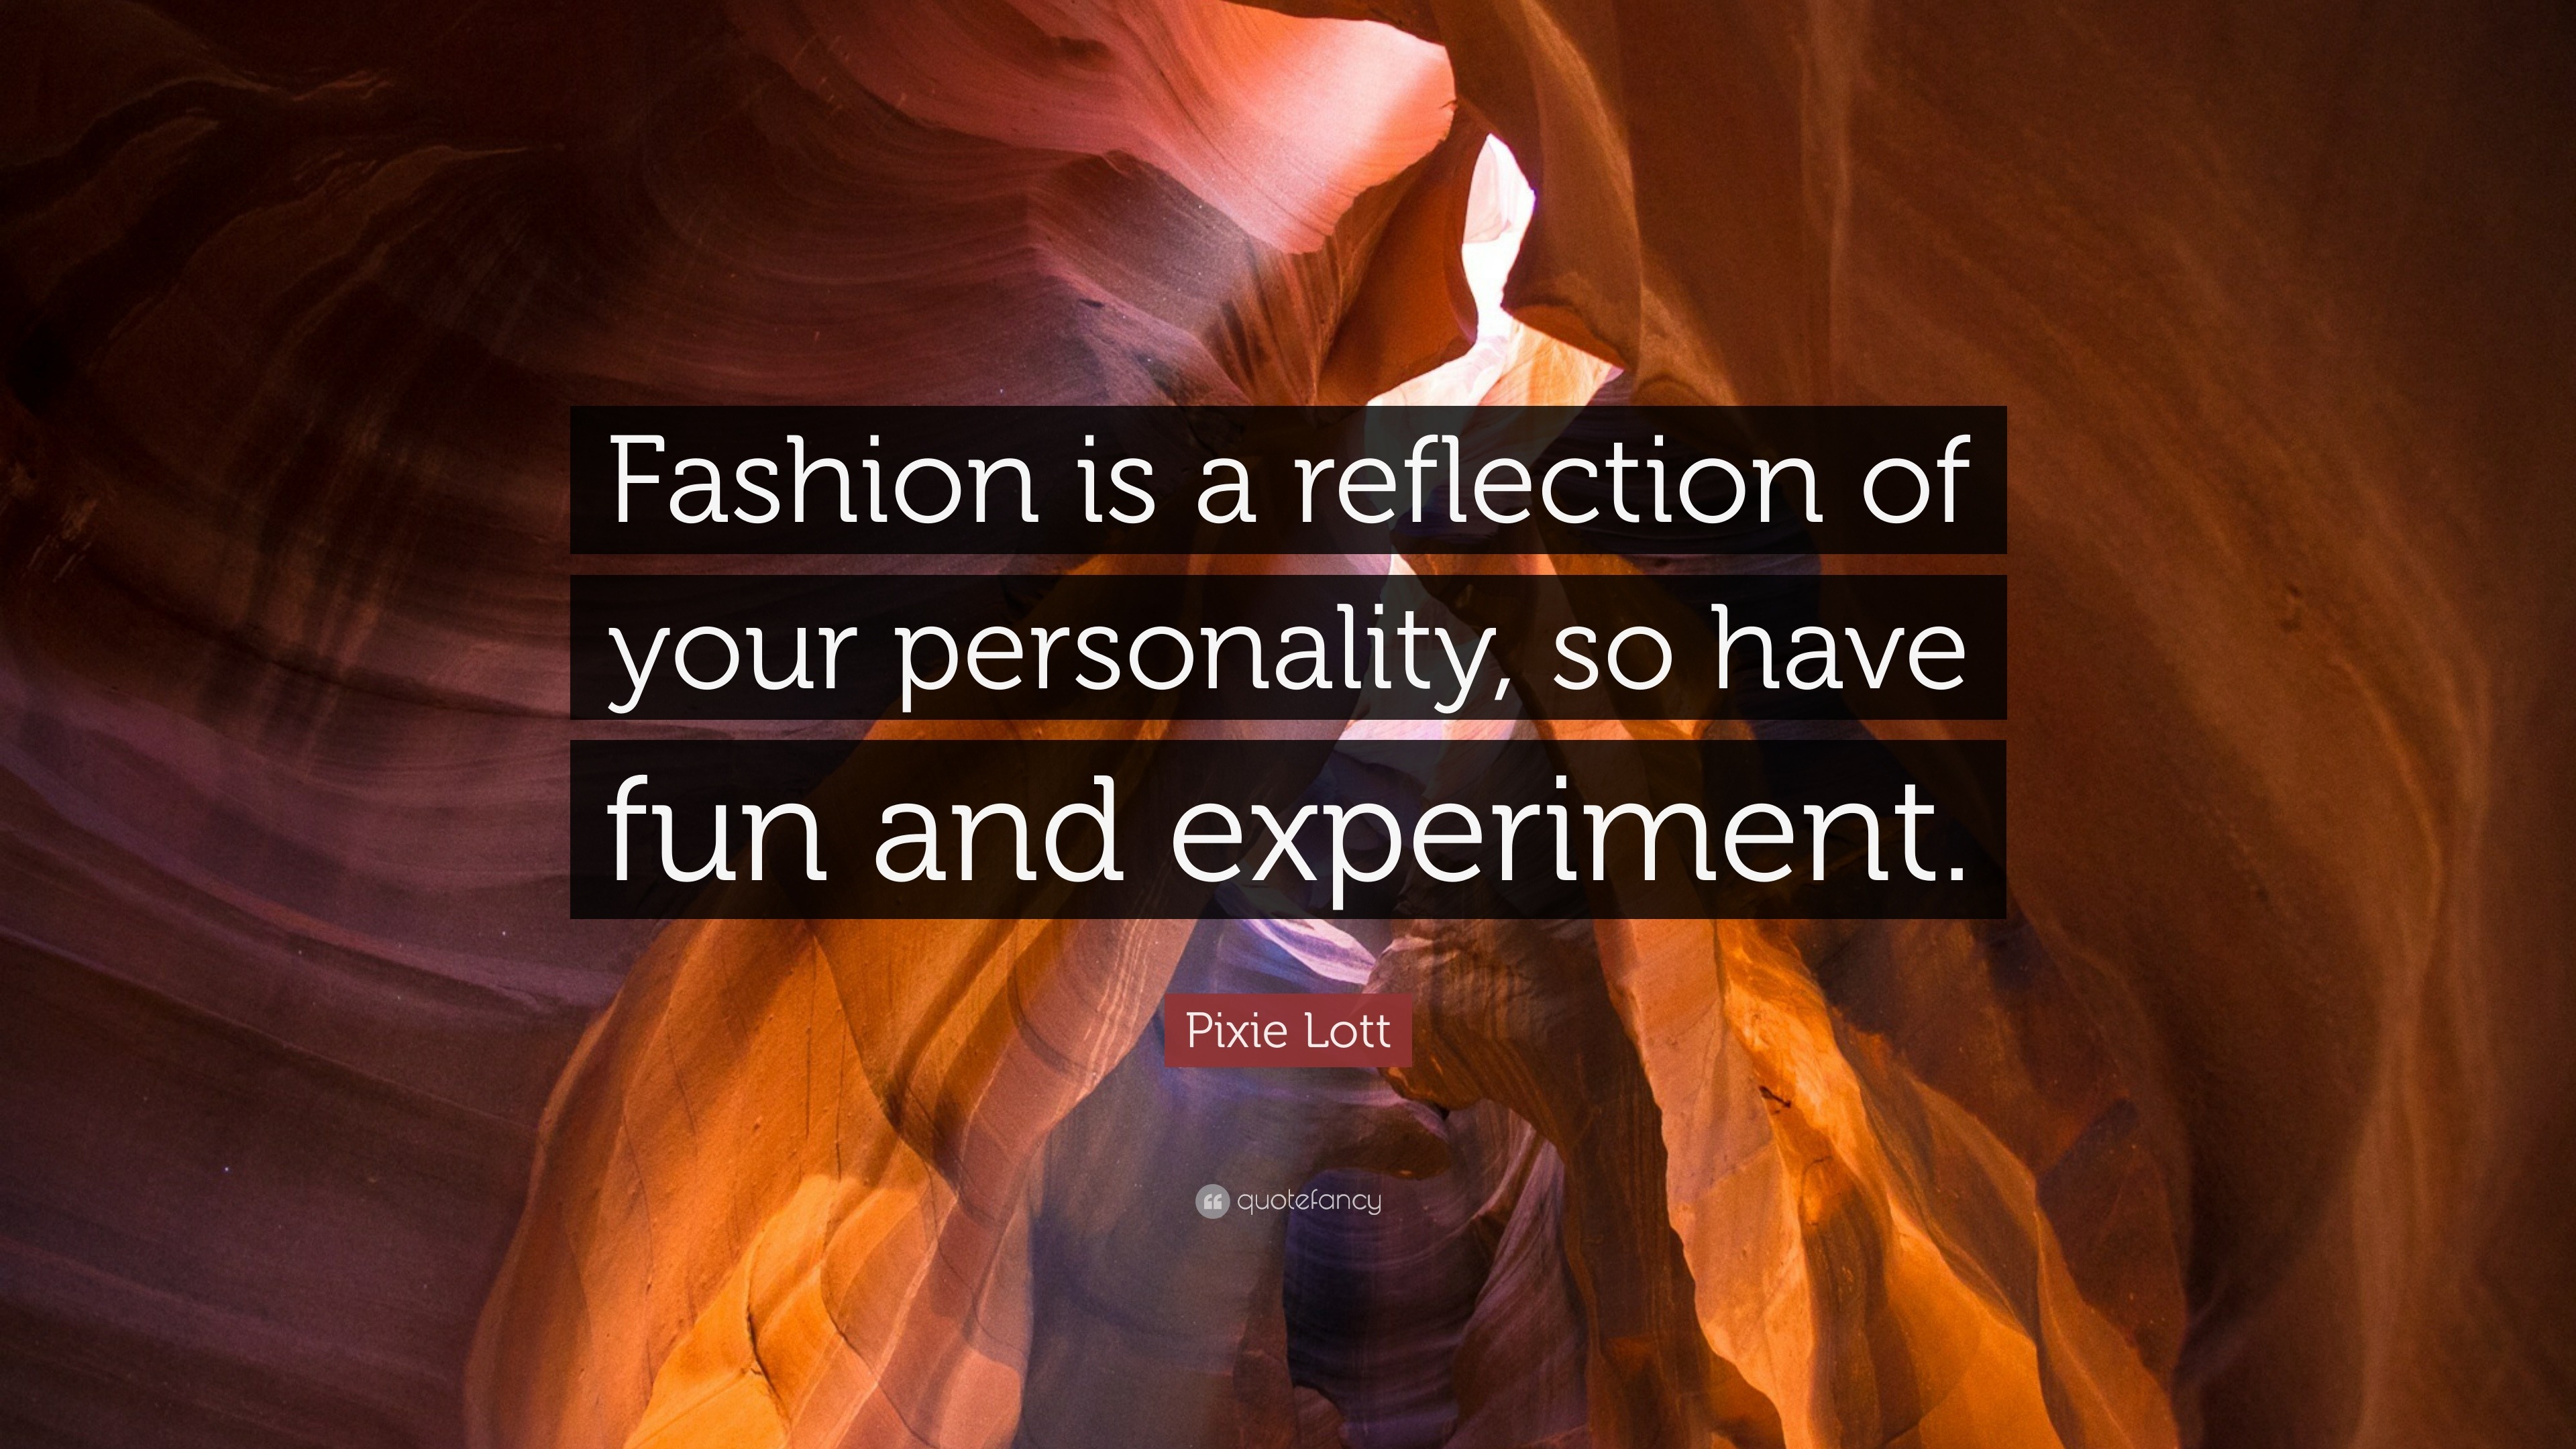 Pixie Lott Quote “Fashion is a reflection of your